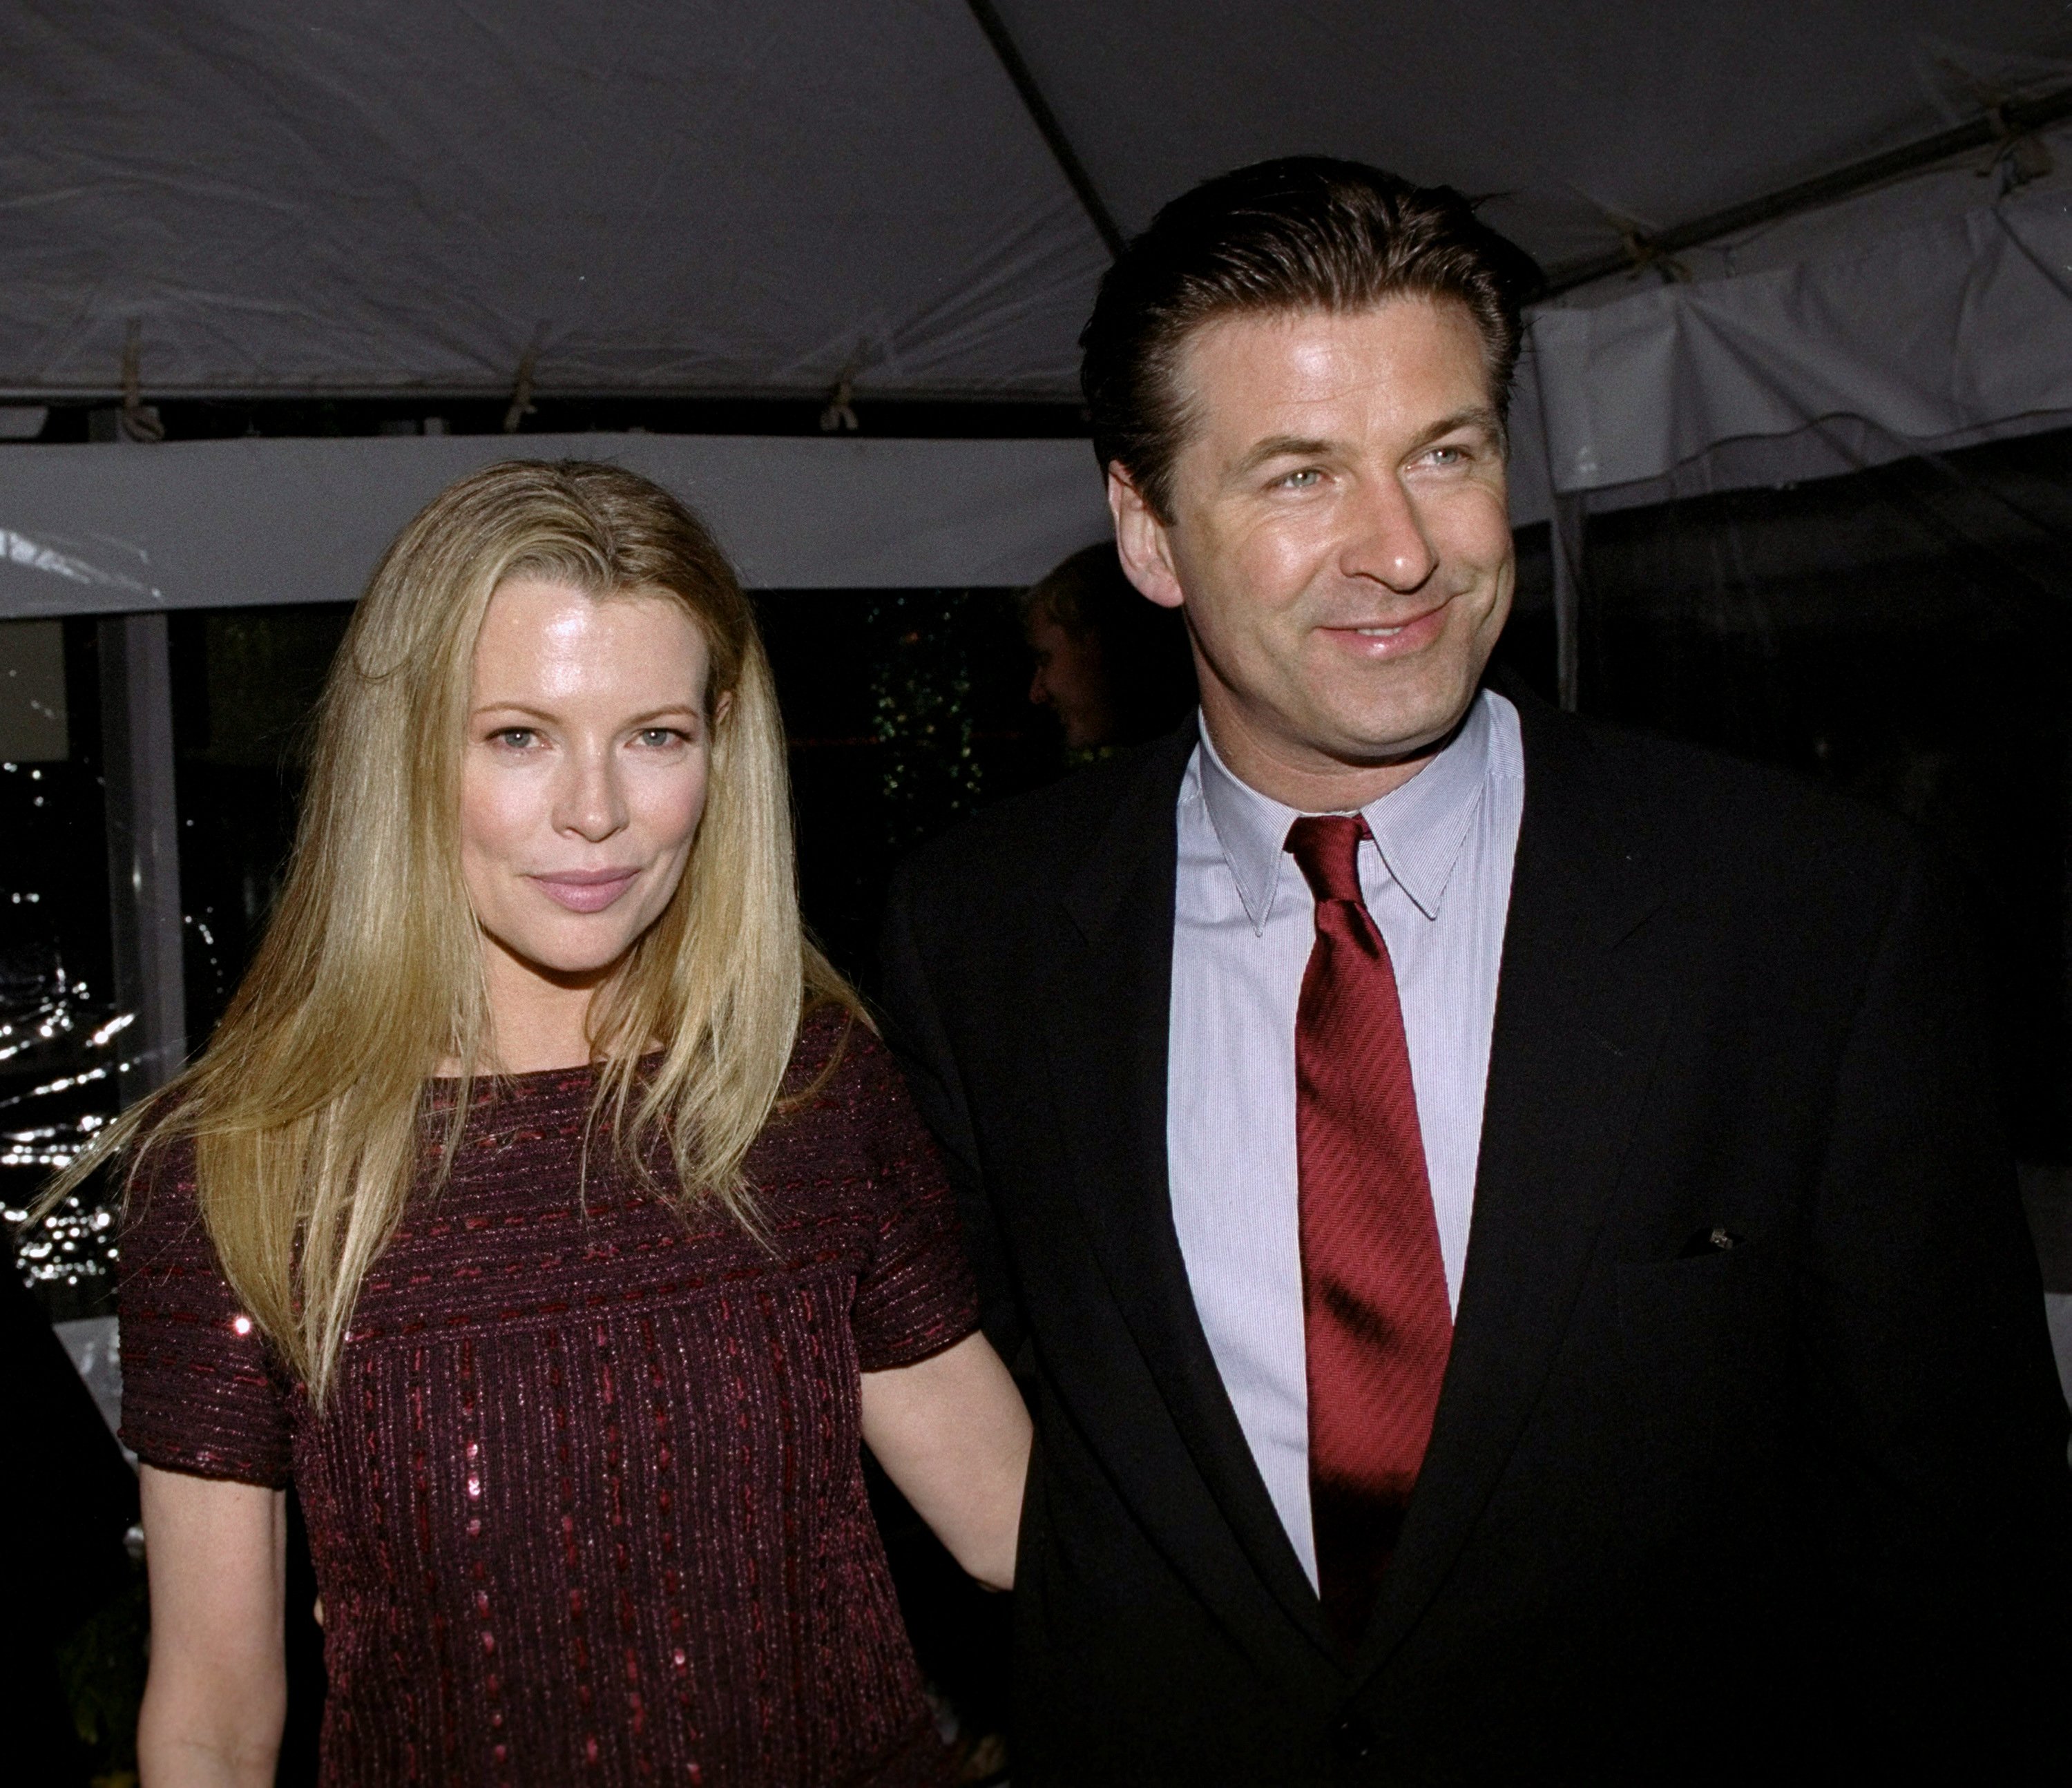 Alec Baldwin and wife Kim Basinger at the Premiere Party for the movie "I Dreamed Of Africa" on April 19, 2000. | Source: Getty Images.